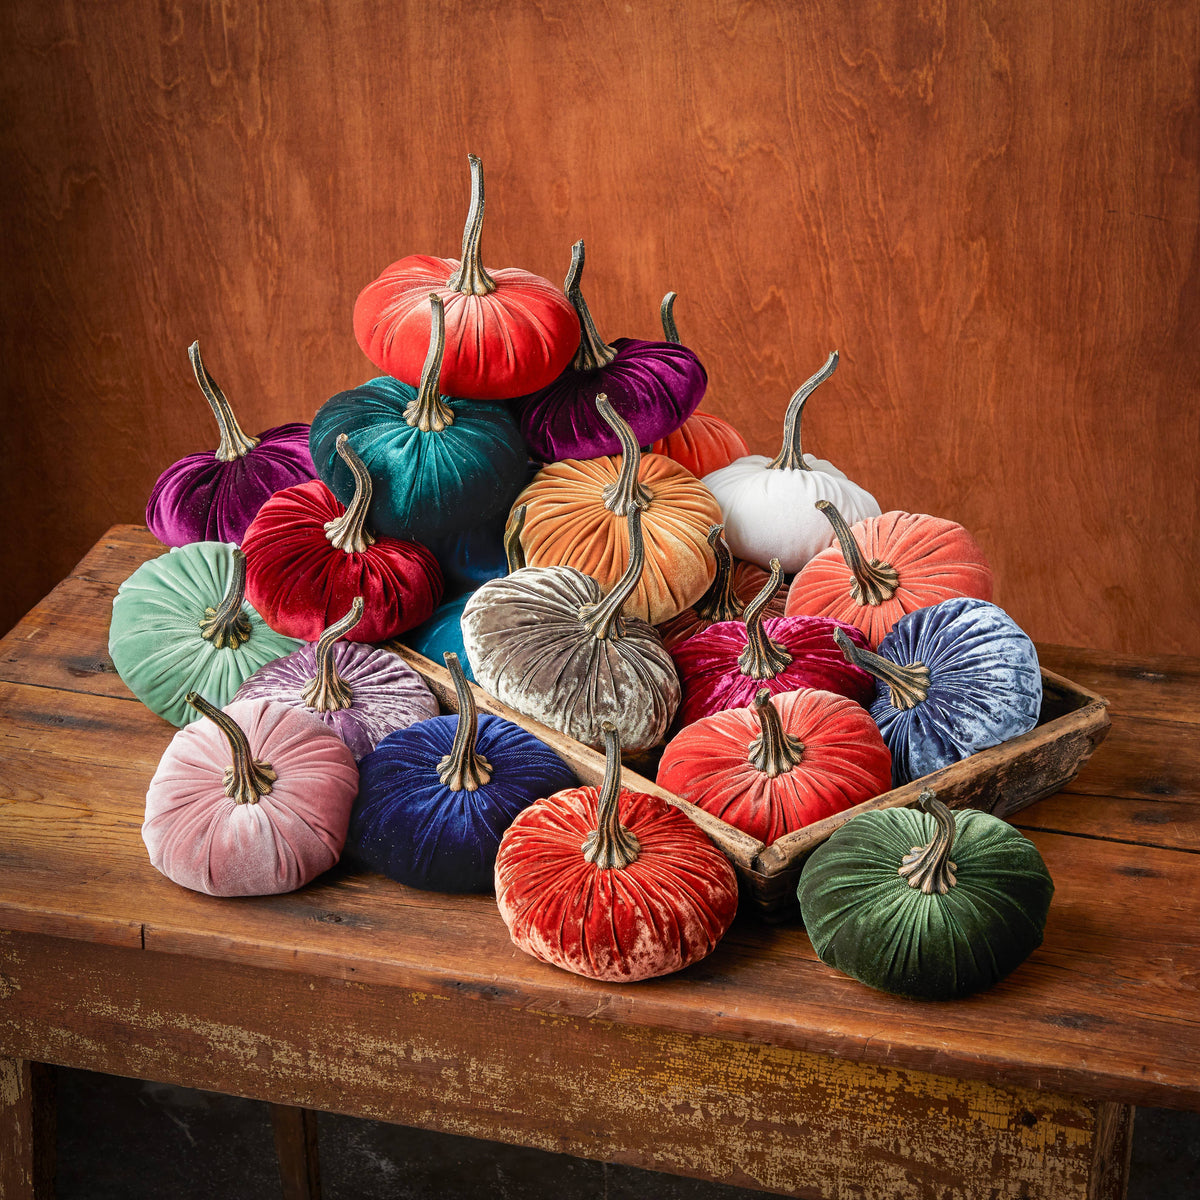 Pile of Handmade Velvet Pumpkins on Wooden table in wooden bowl with wooden background